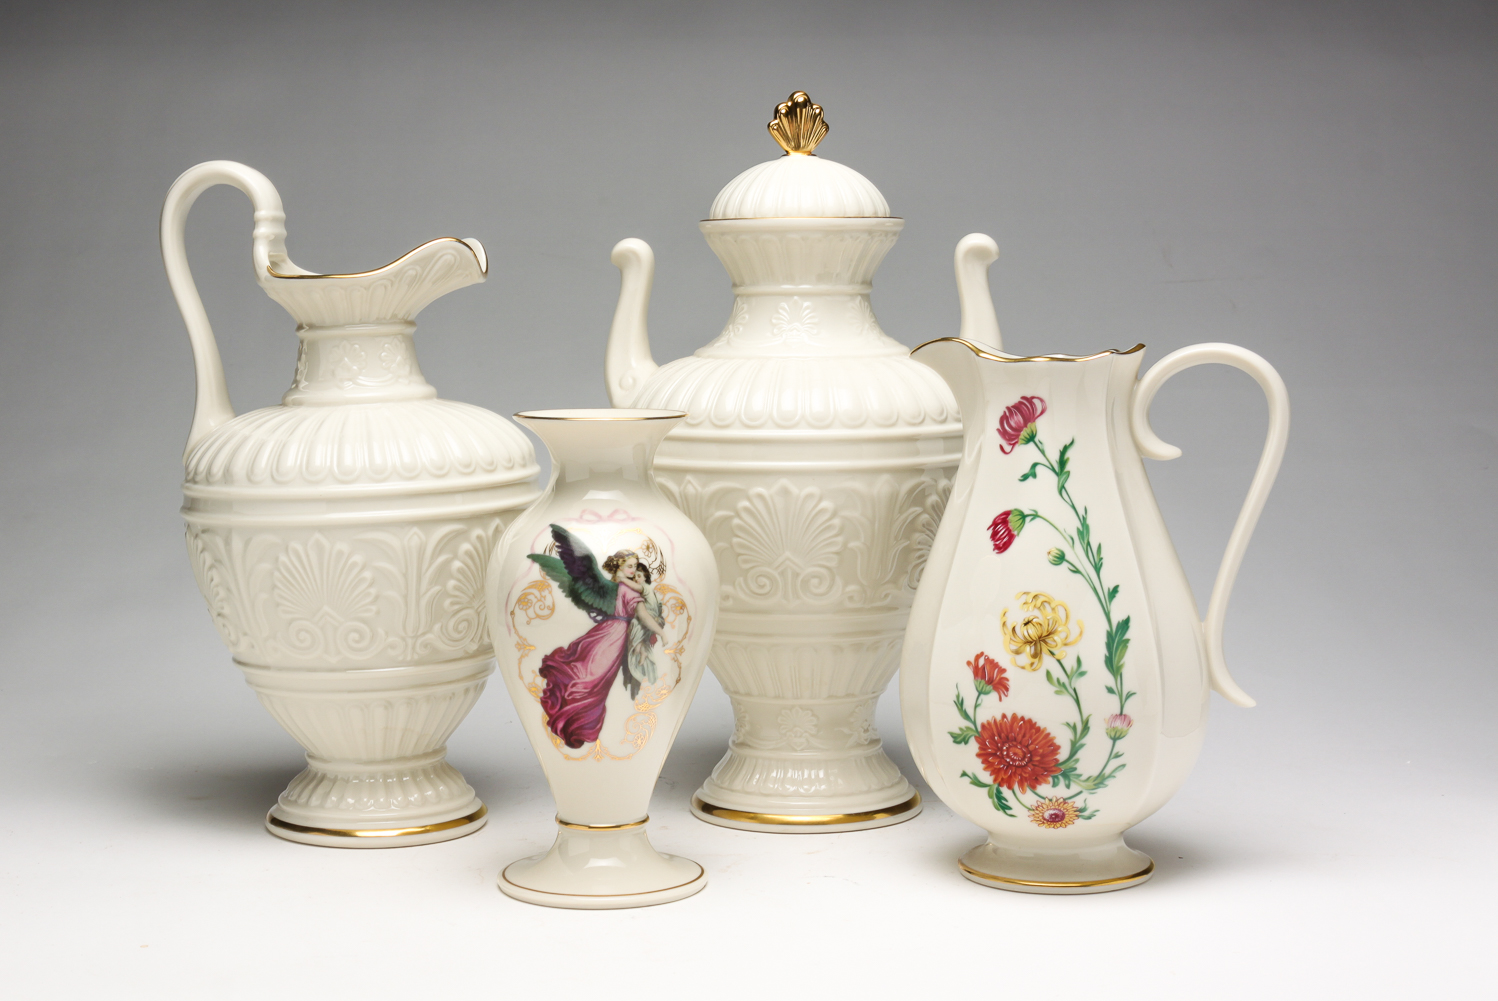 FOUR PIECES OF LENOX. American, late